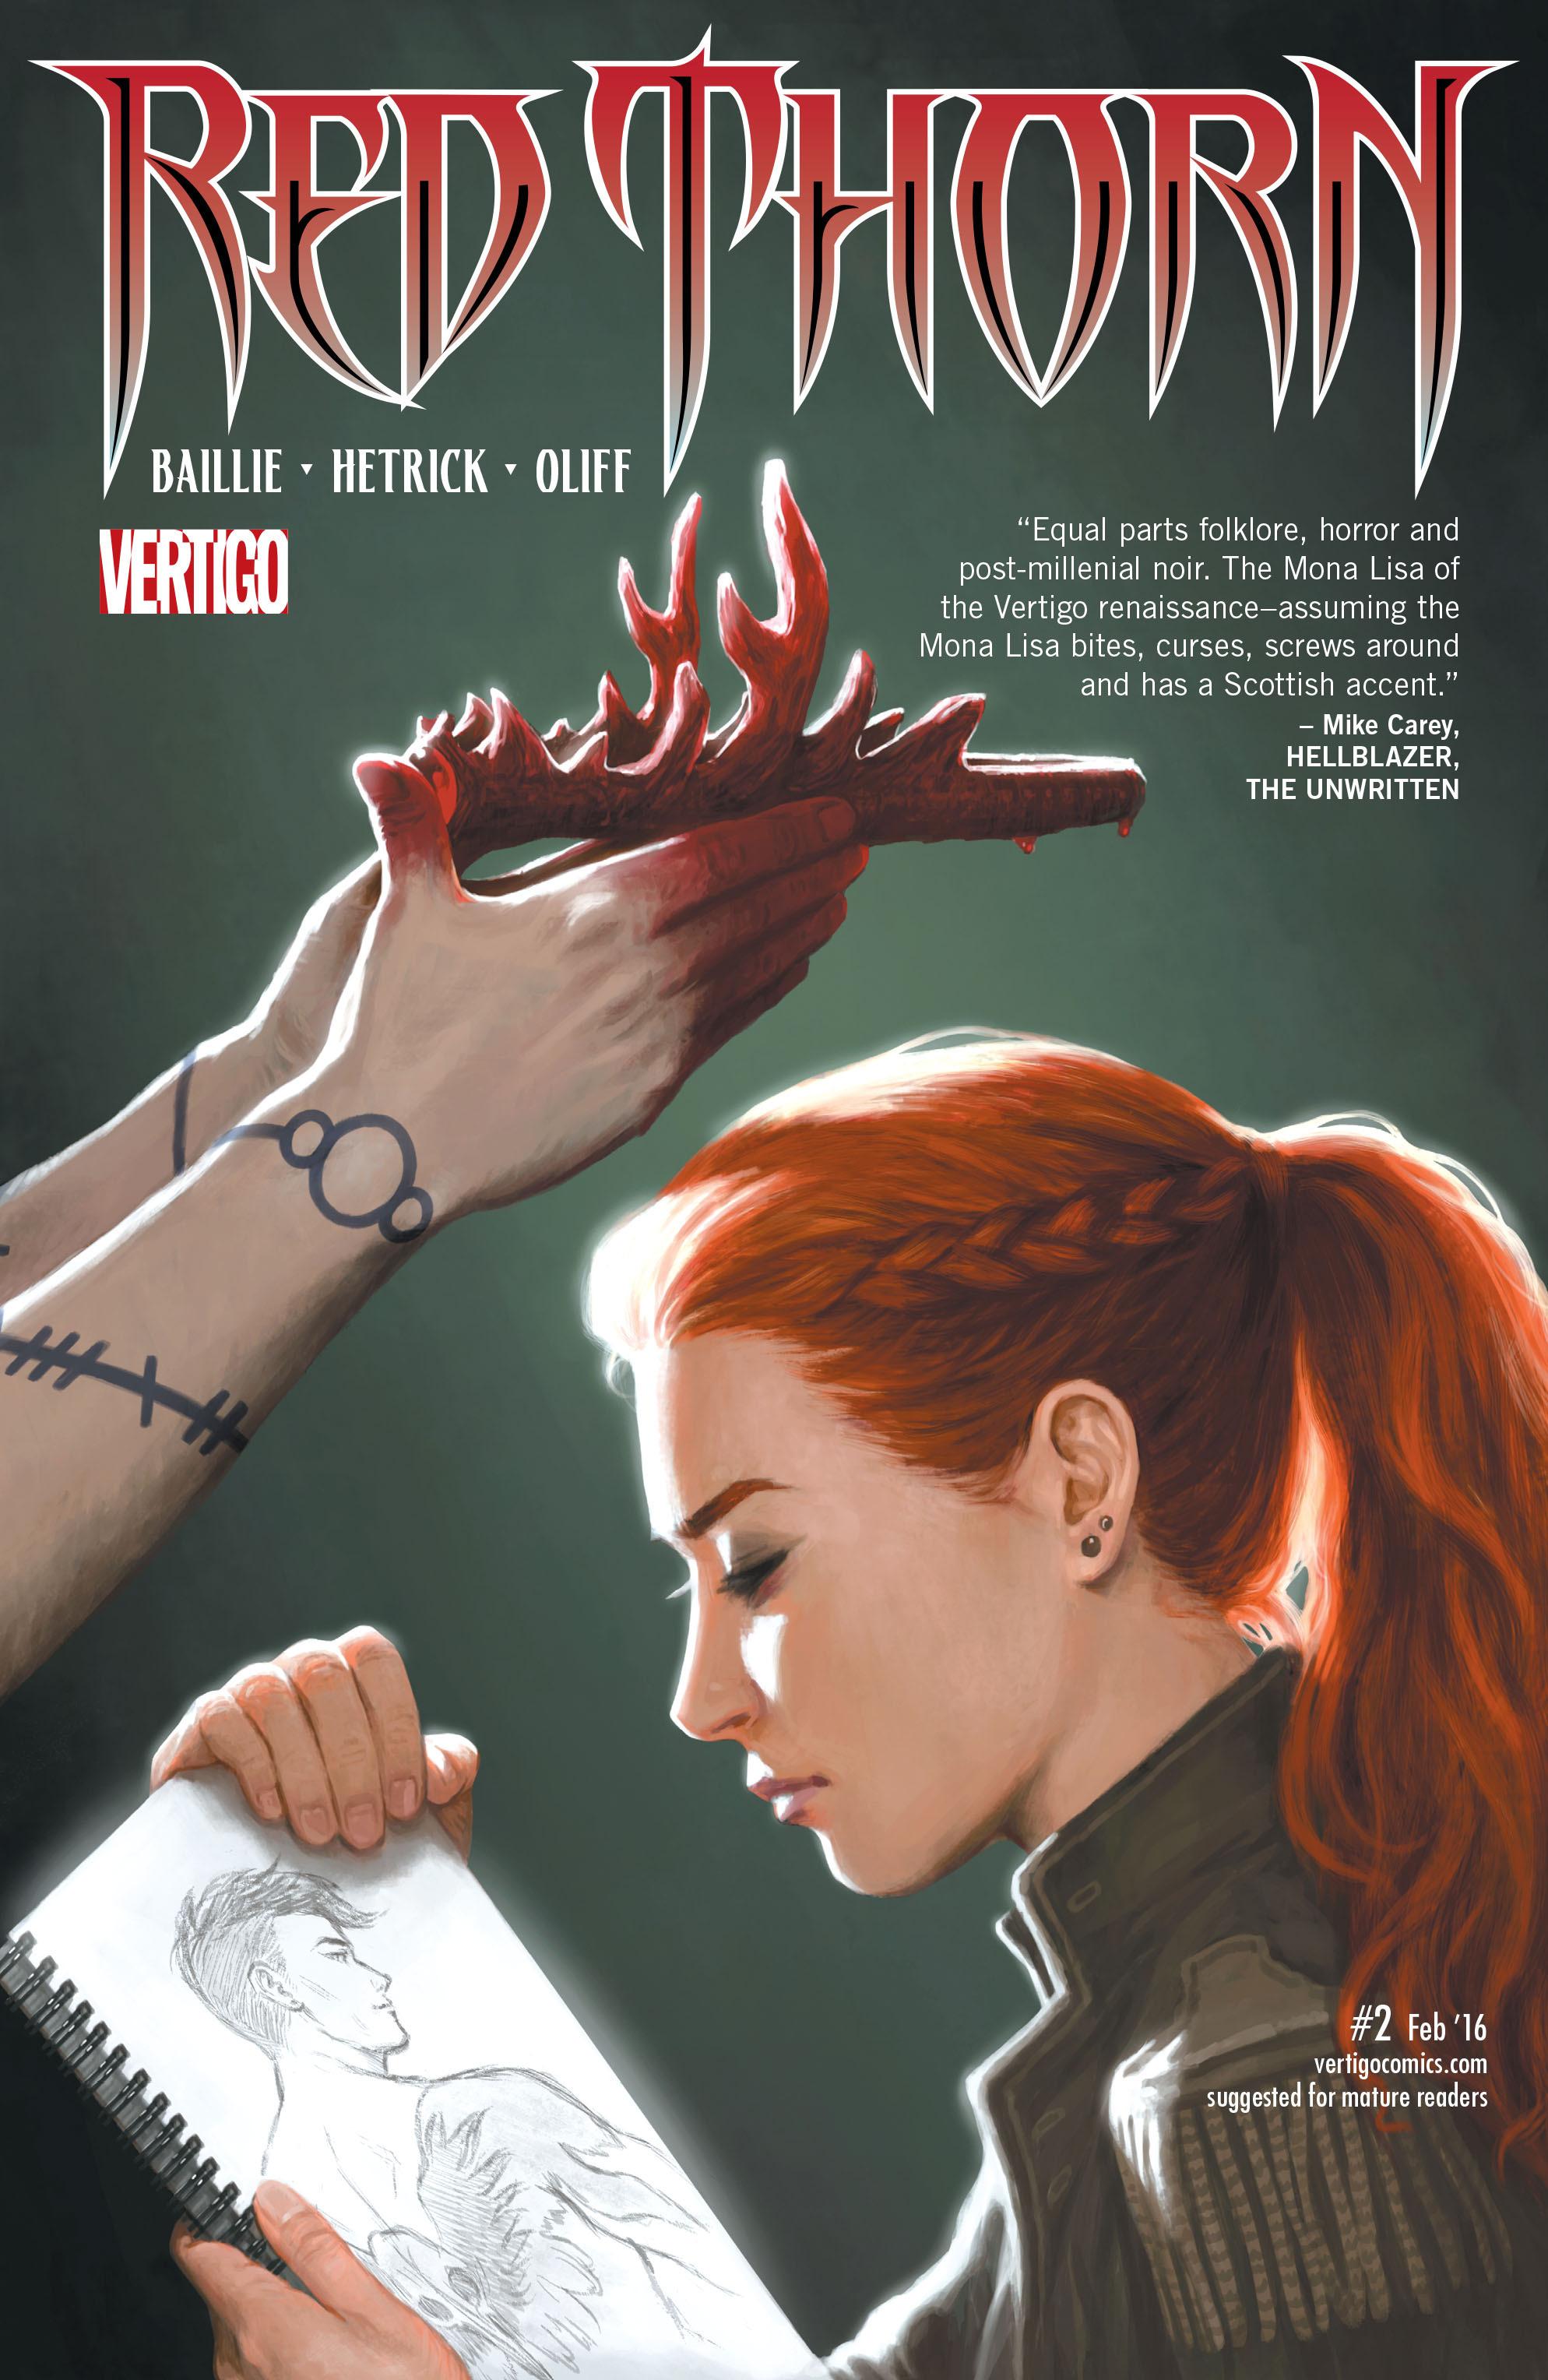 Red Thorn Vol. 1 #2